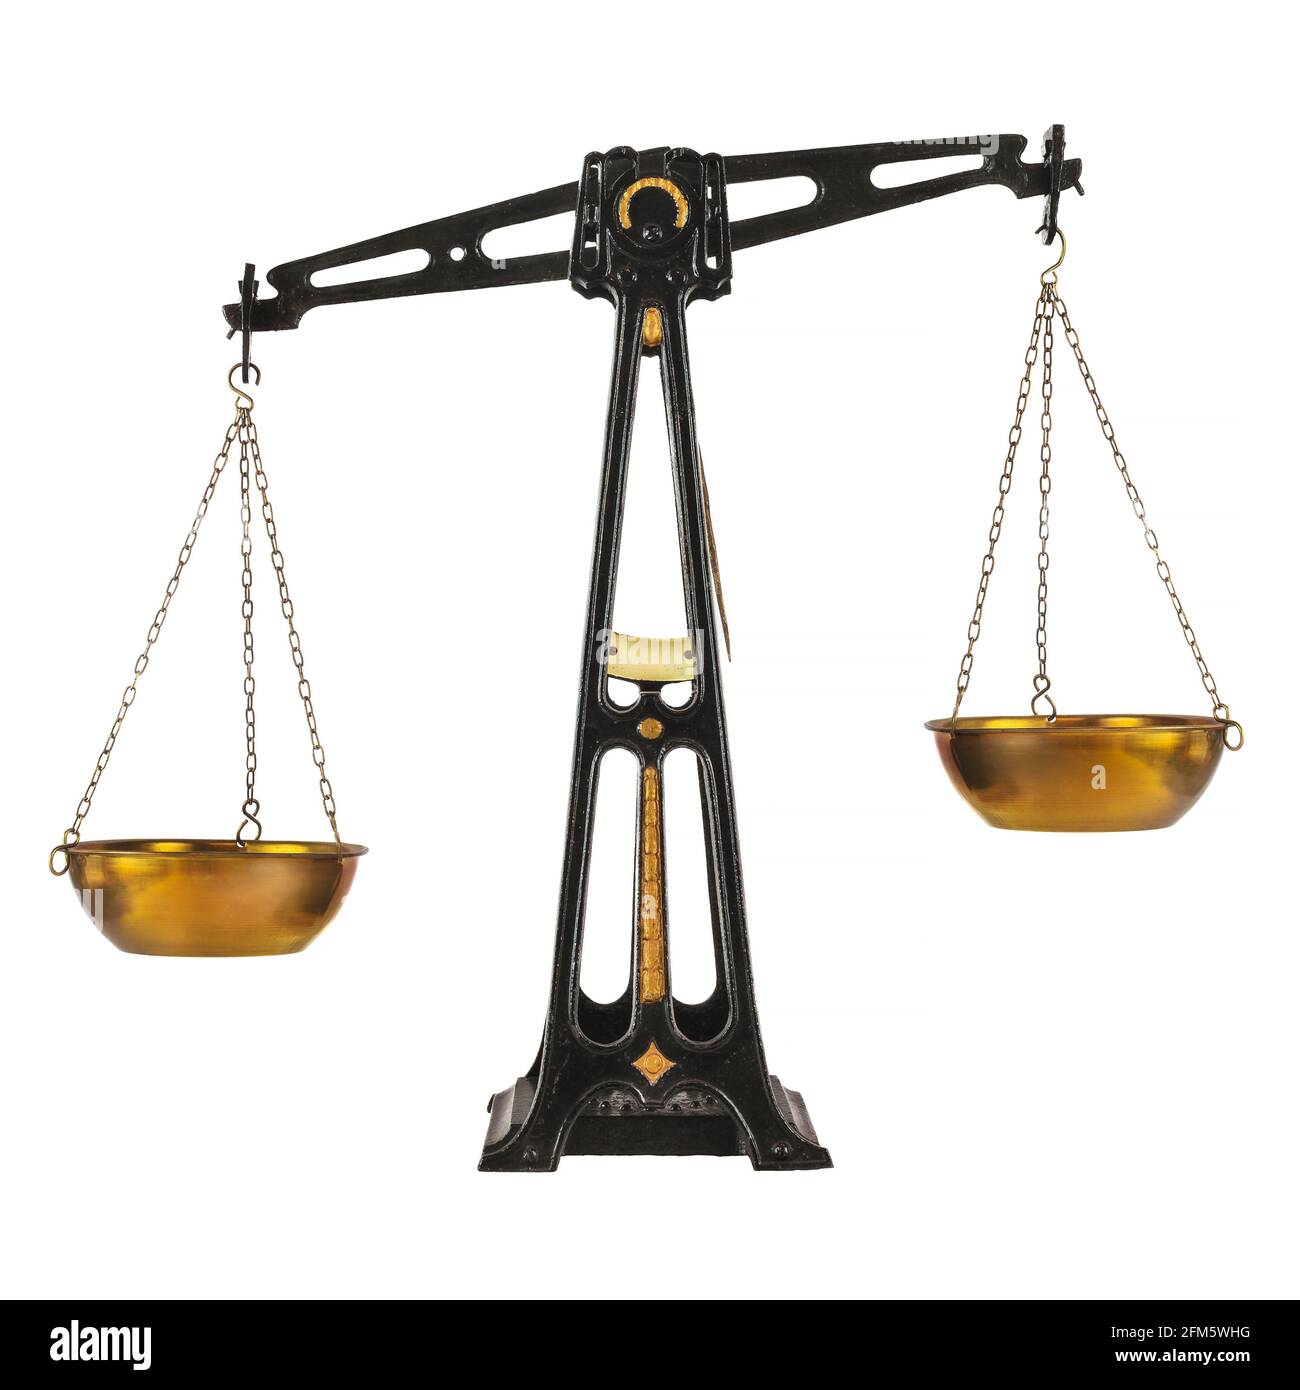 The History of the Weighing Scales  Weighing Balances through the Ages